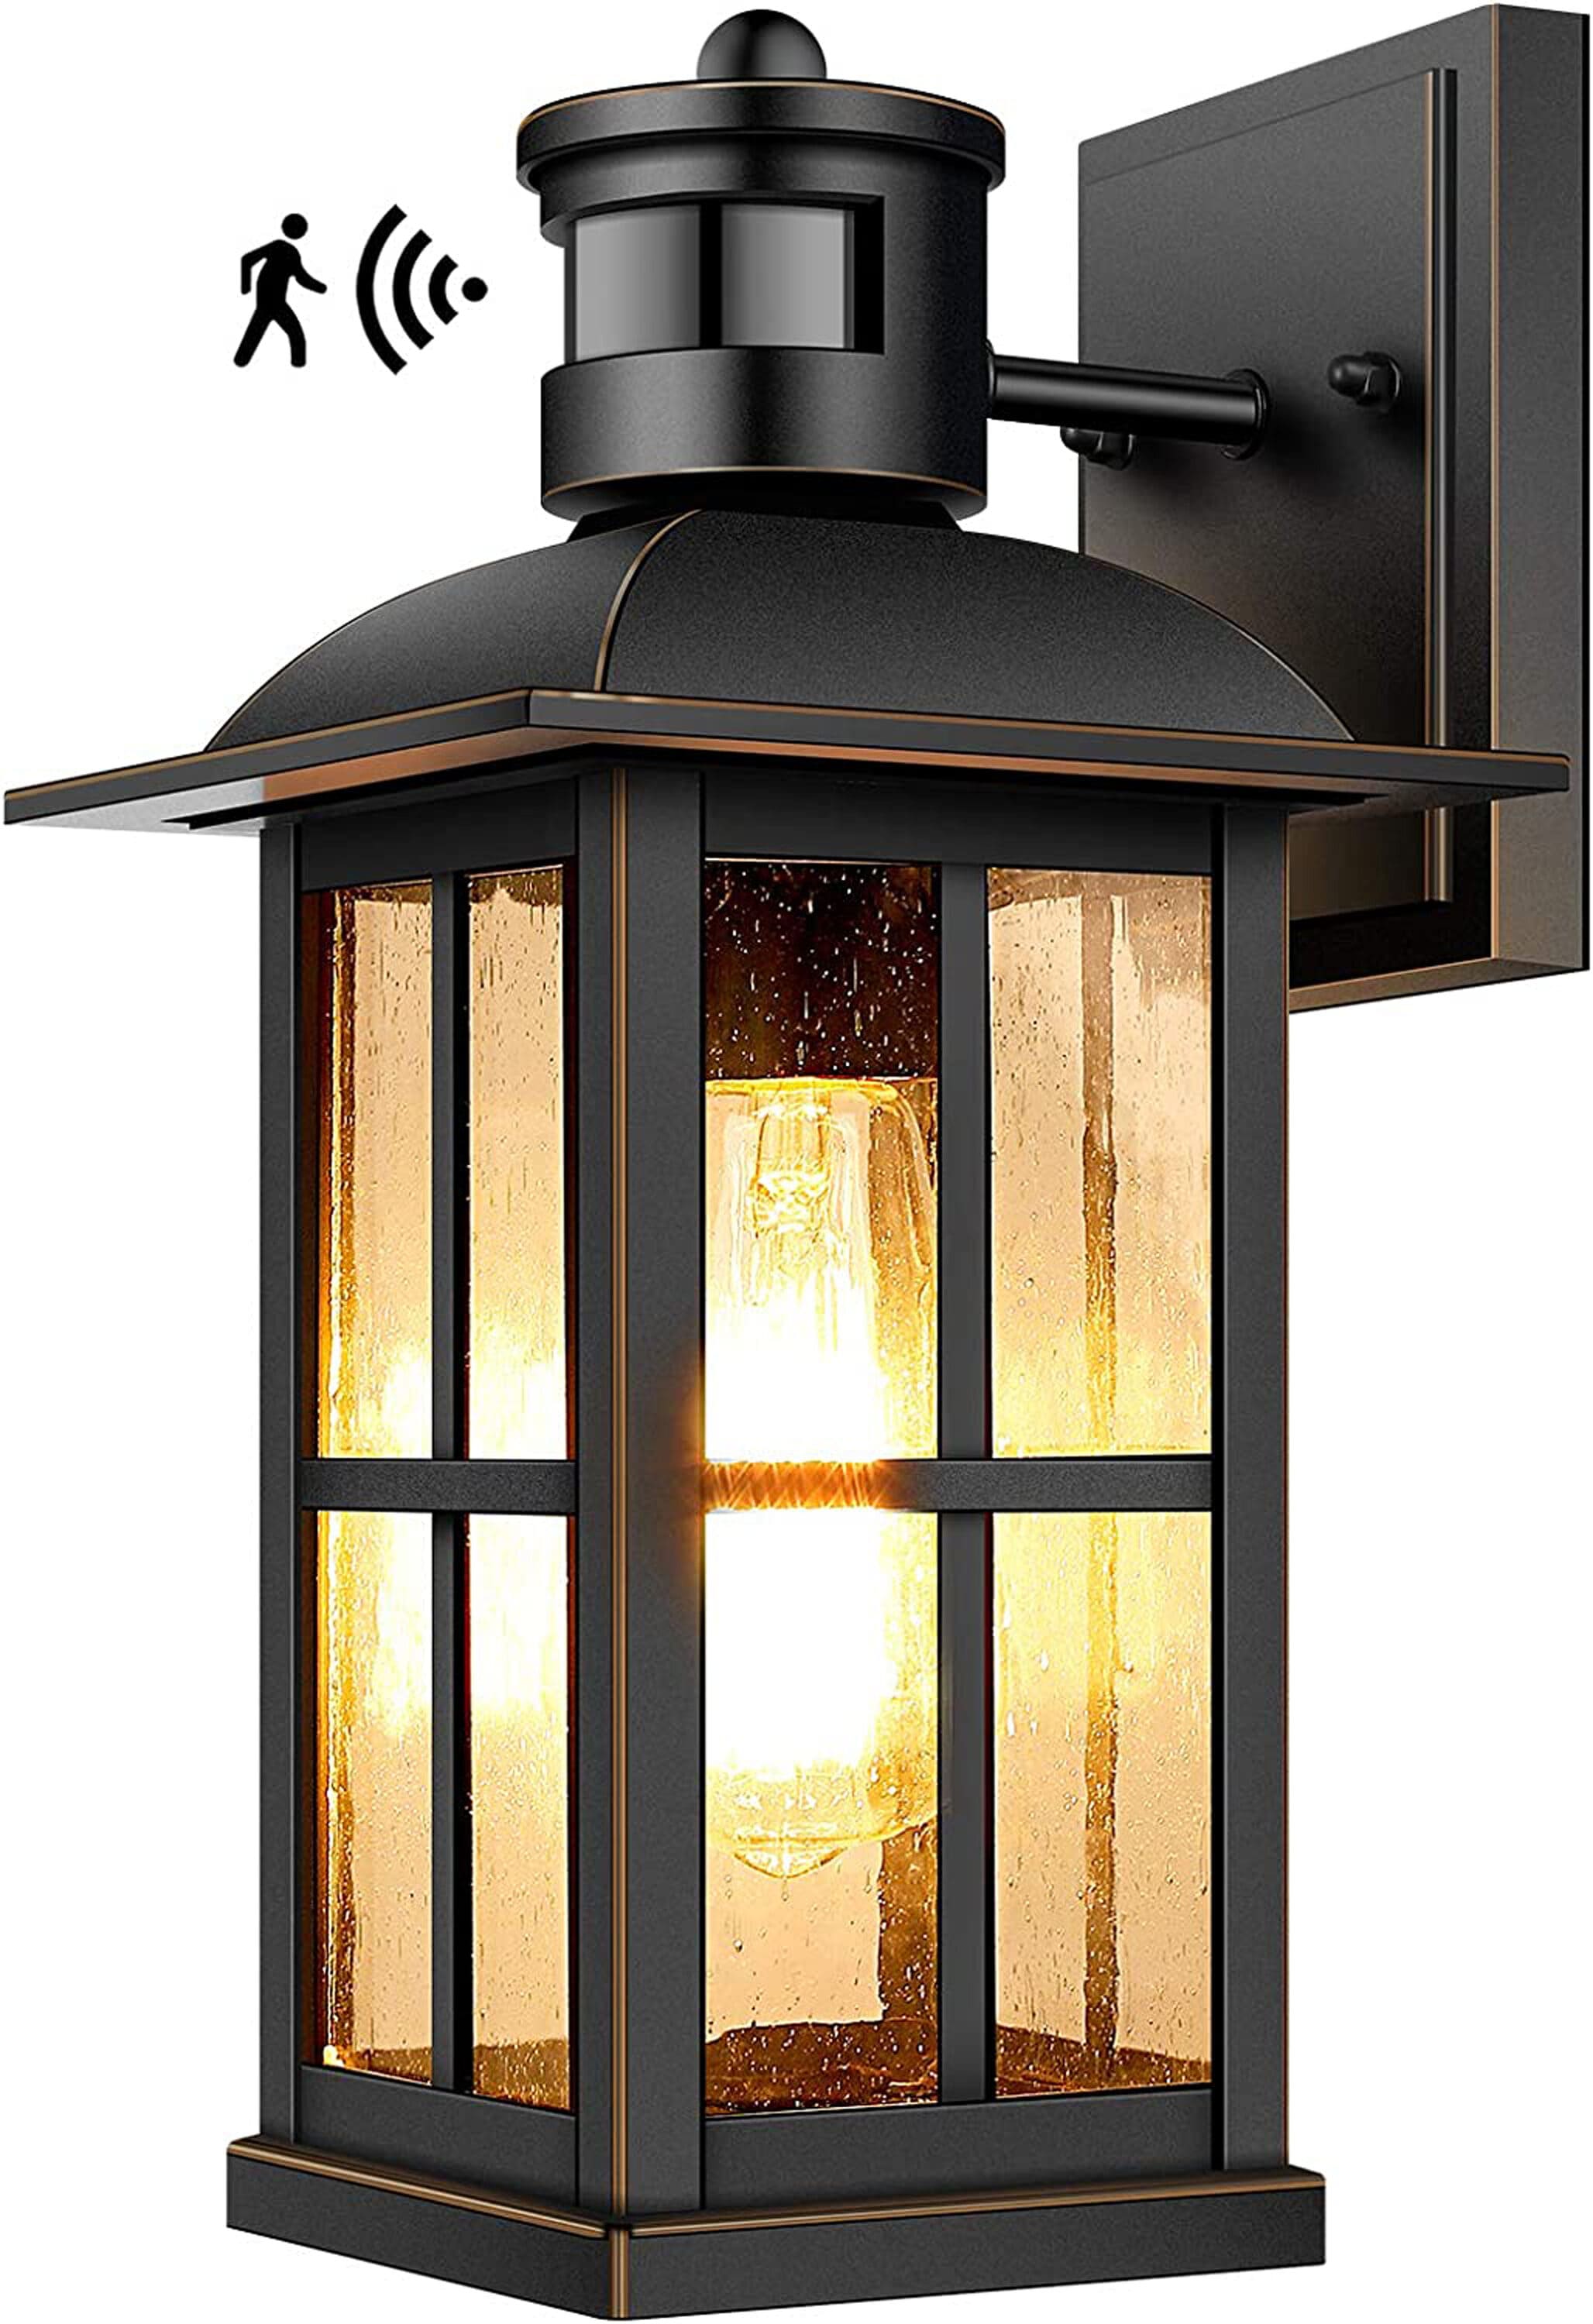 ADJ PIR Motion Sensor Outdoor Light (Bulb included)Advanced Dusk to Dawn Exterior Lantern Fixtures Wall Light the Outdoor Wall Lights department at Lowes.com